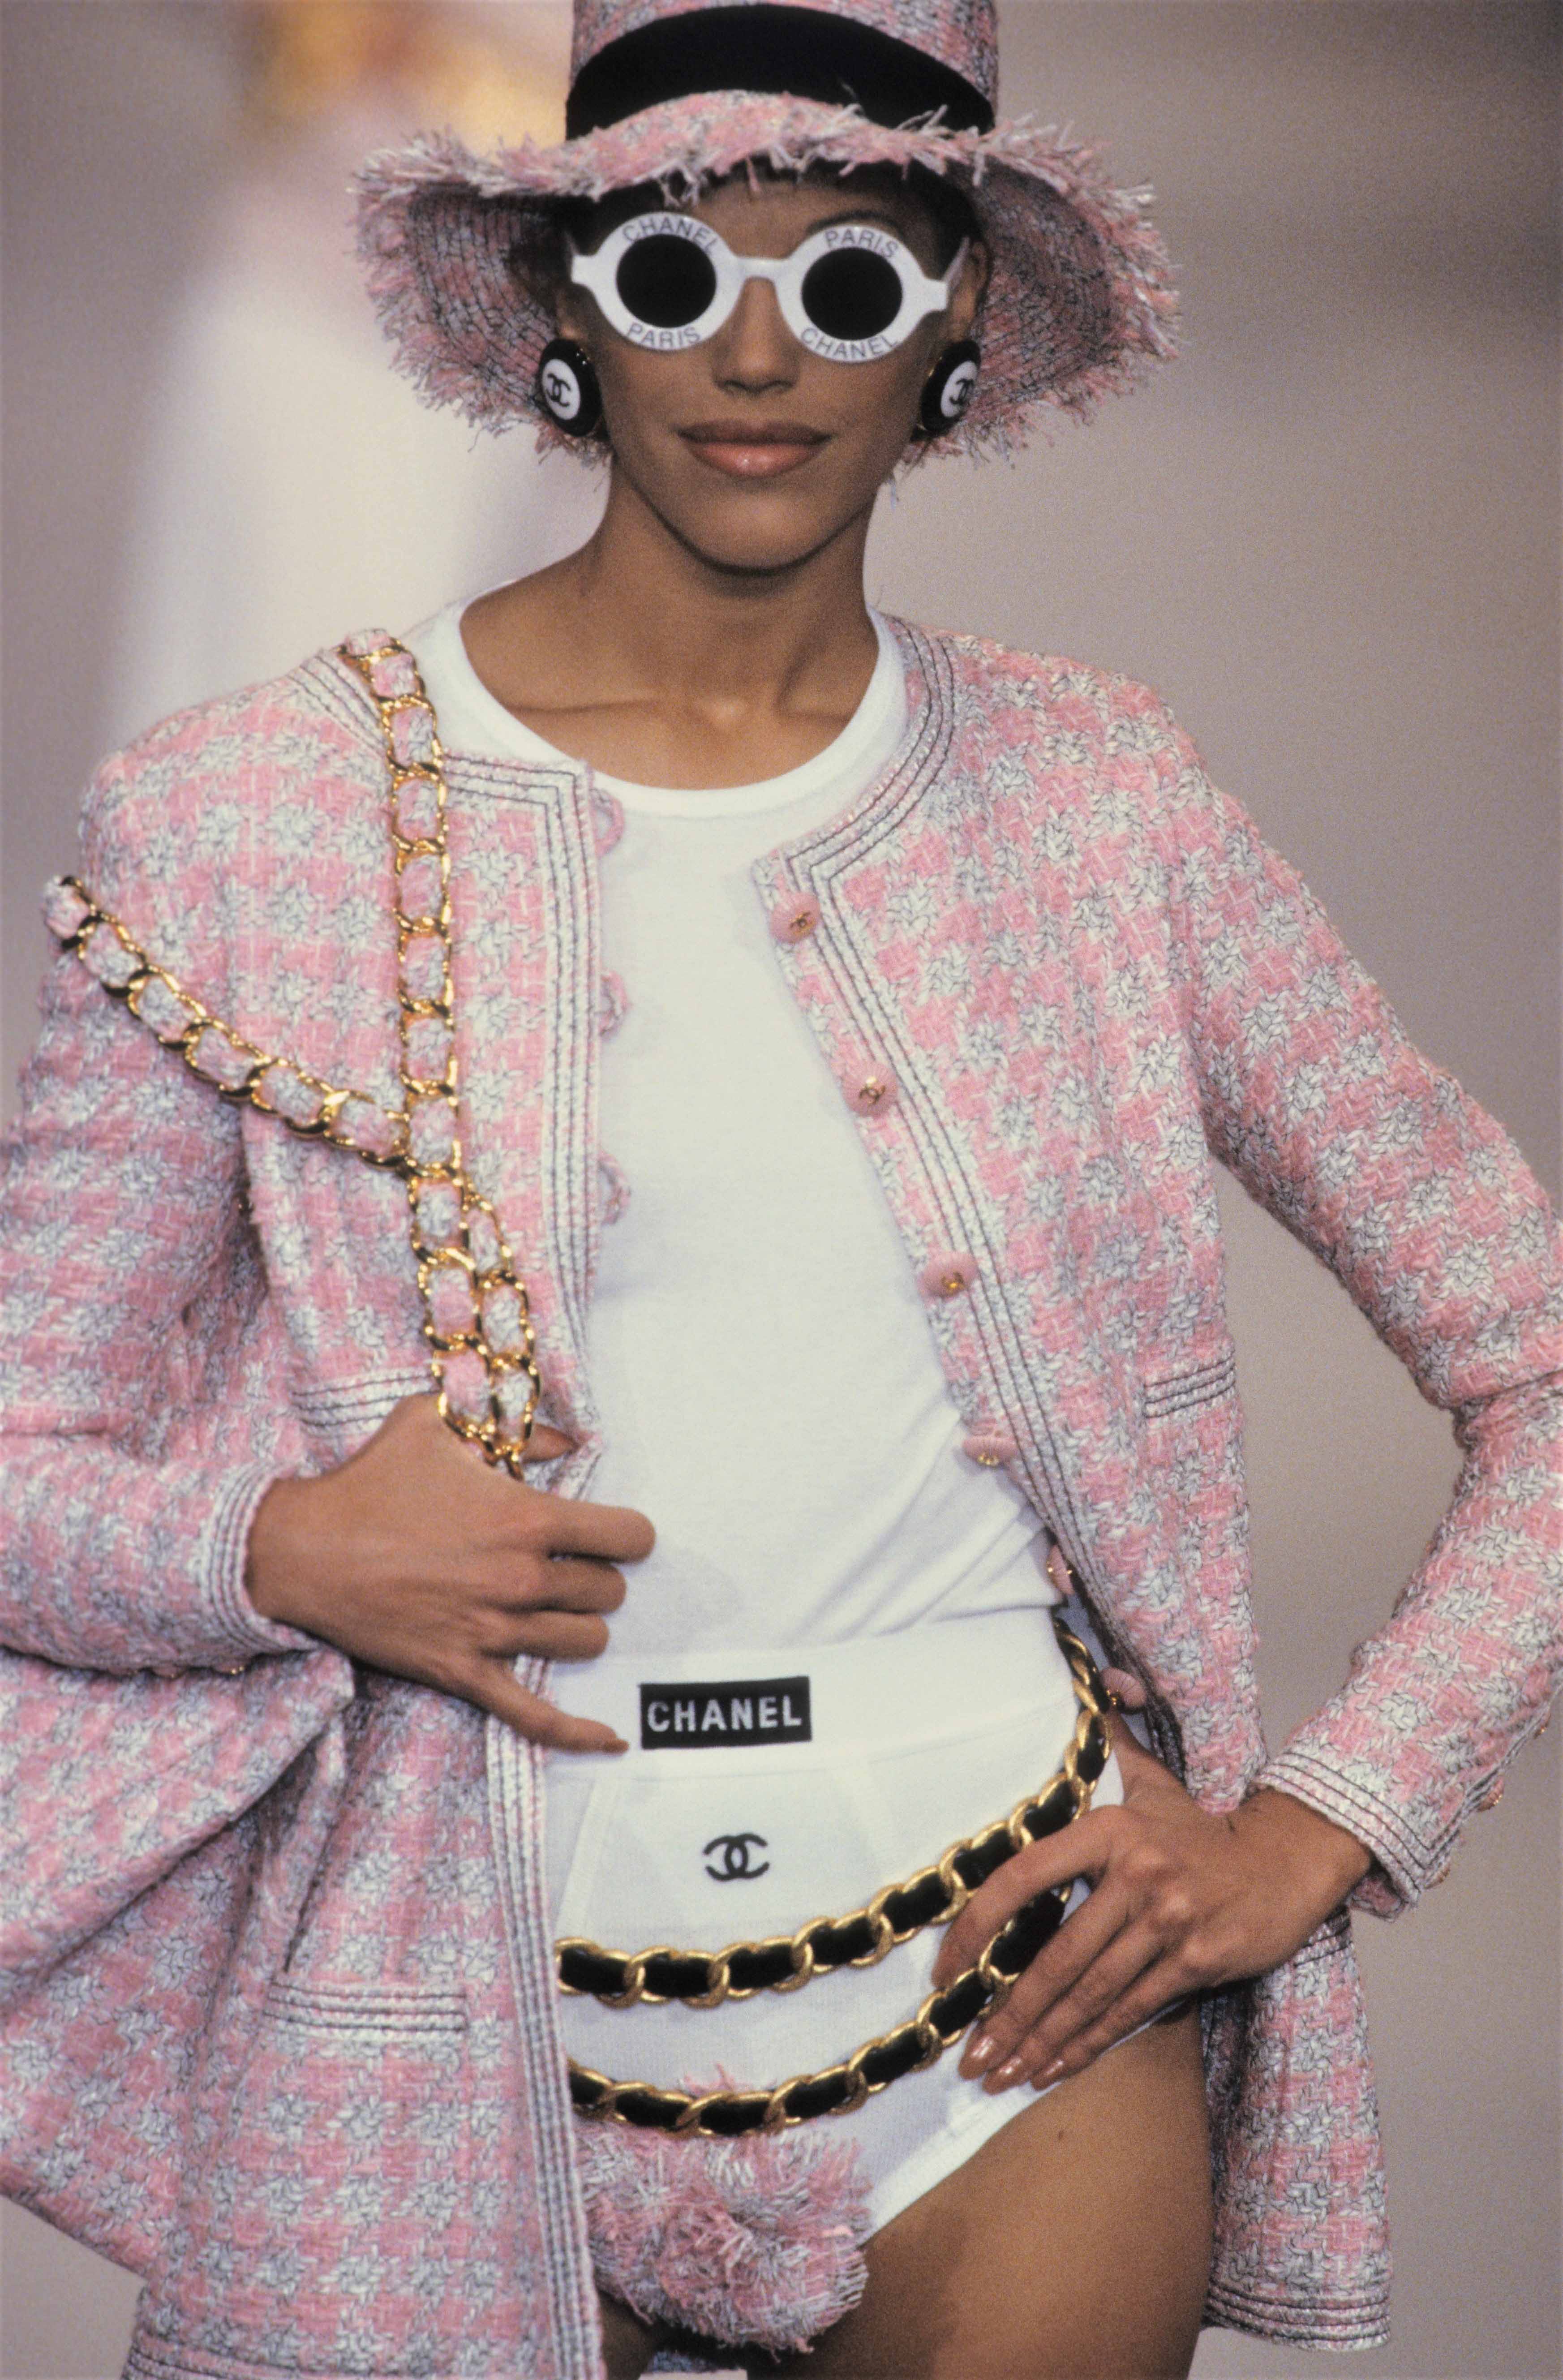 chanel in the 90's - chanel -spring-1993-ready-to-wear-details-Img012567-emma-sjoberg-wiklund